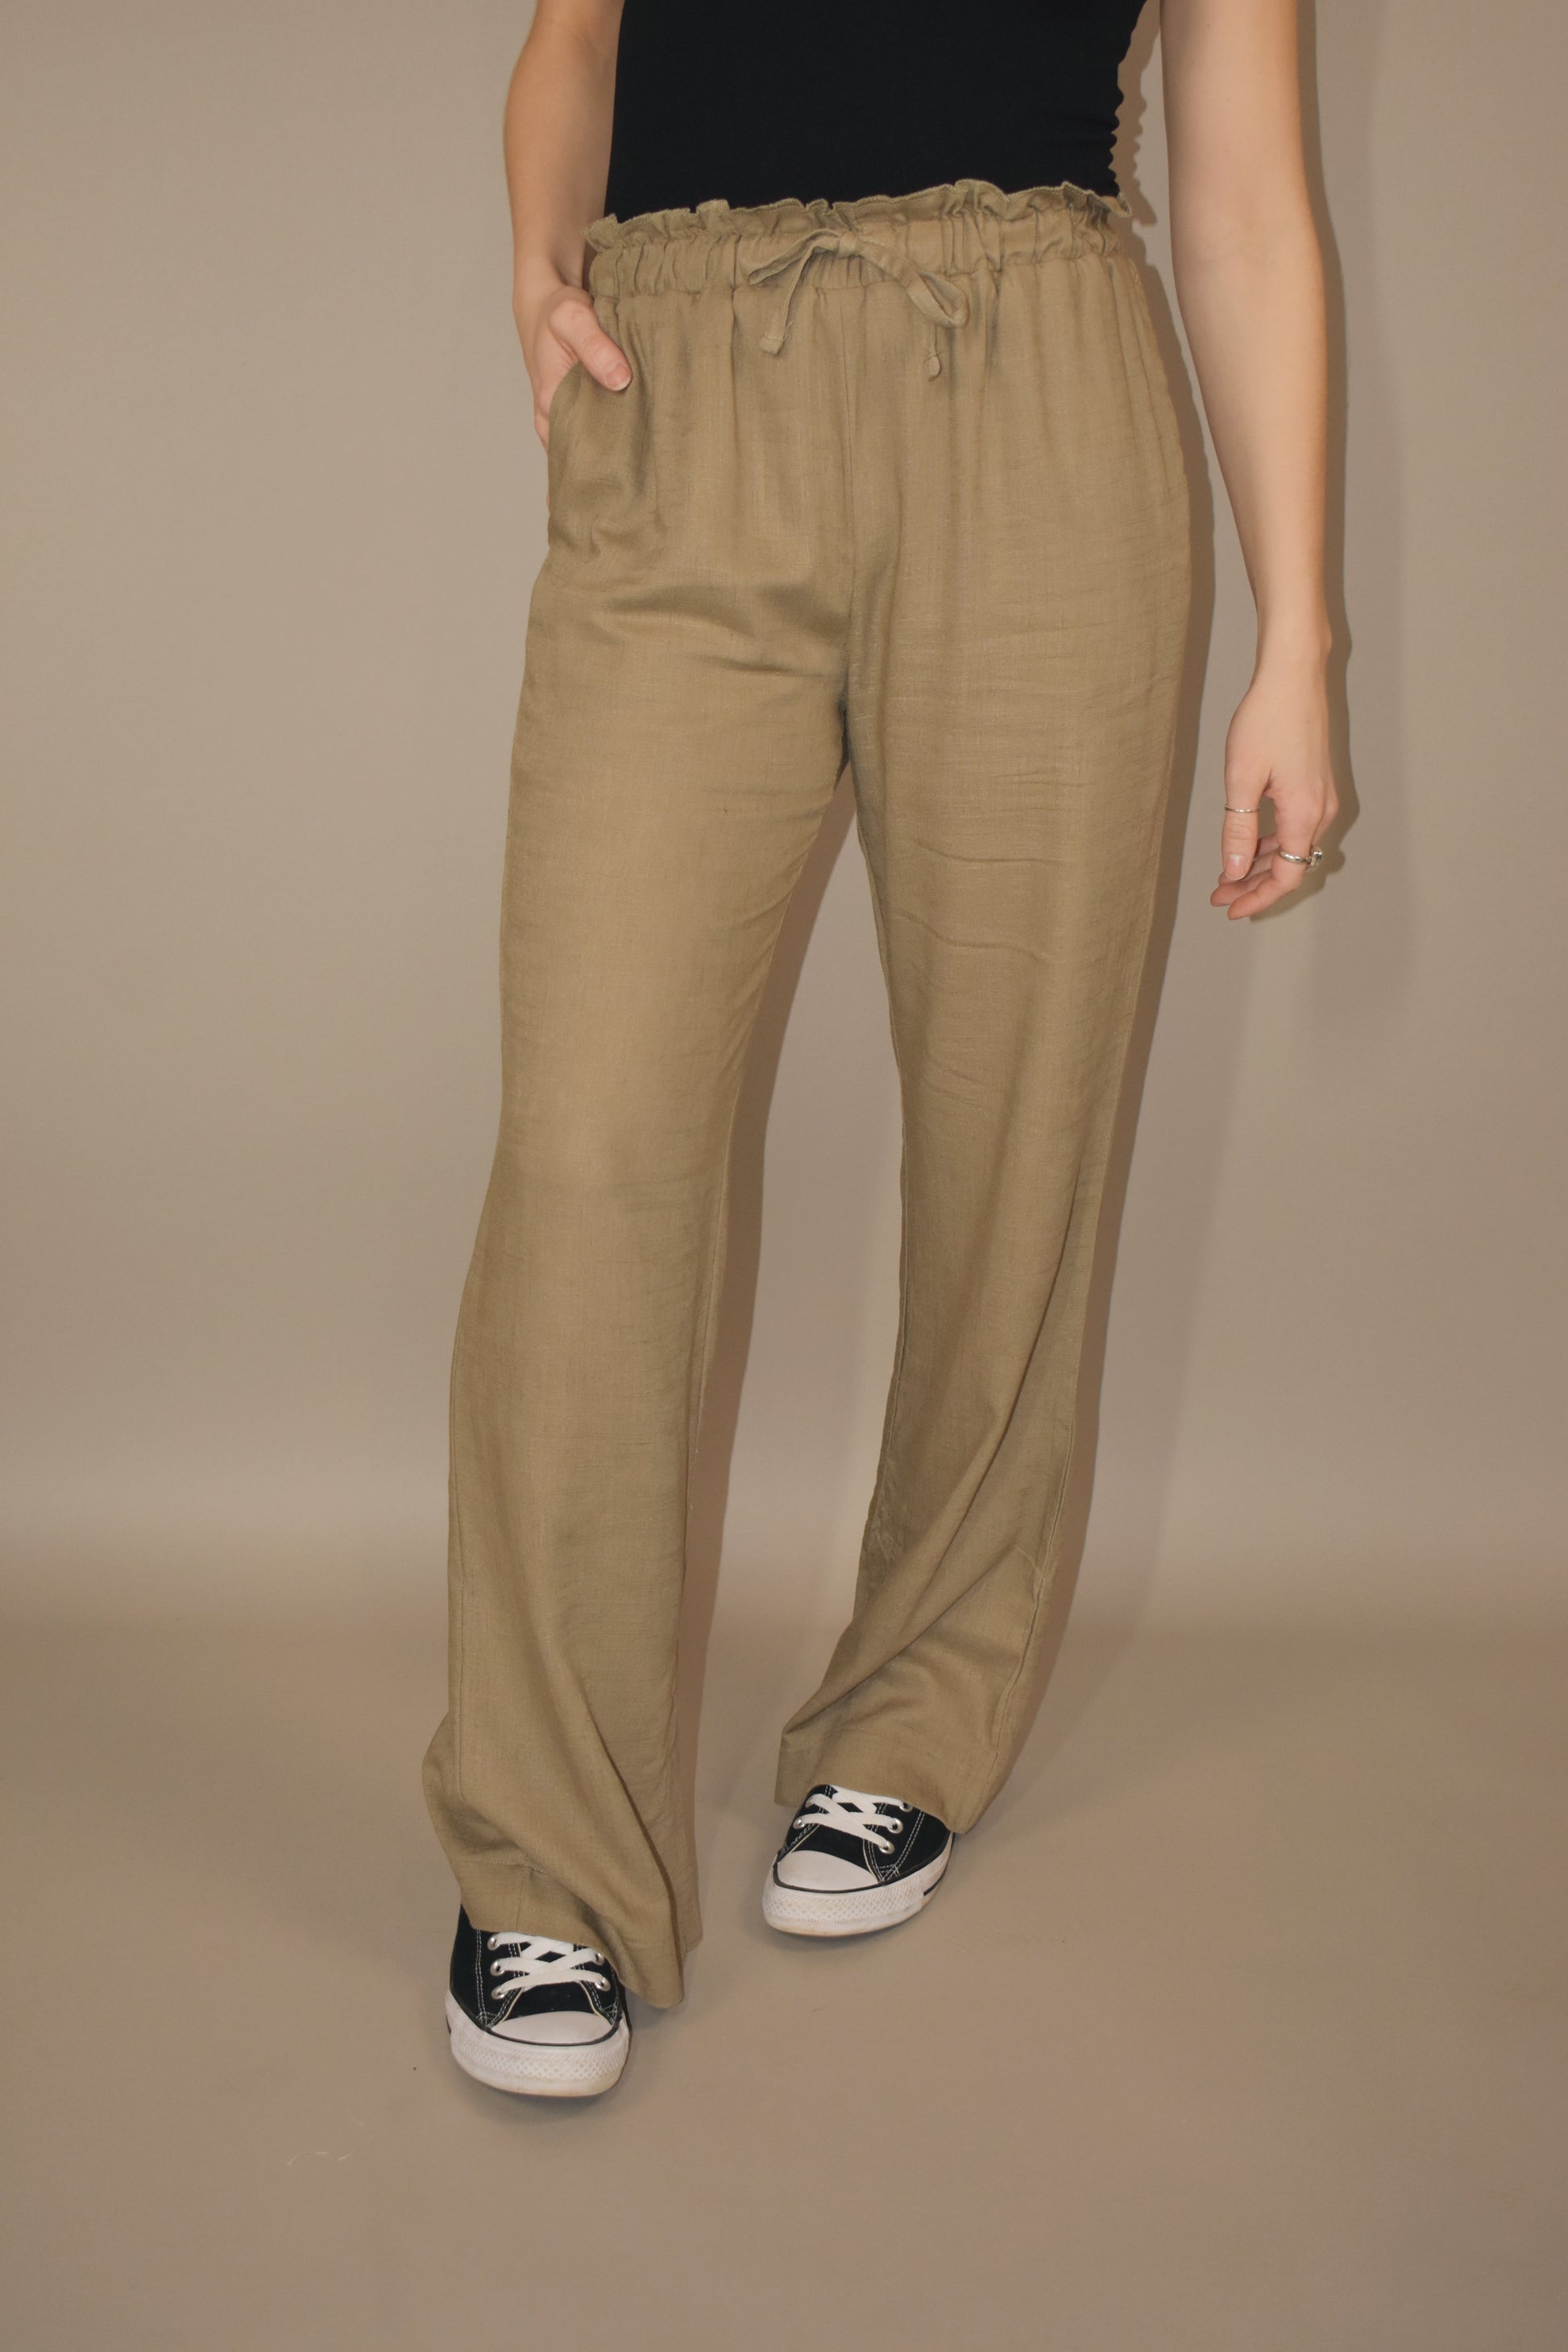 straight leg relaxed resort pants with a lettuce top with a drawstring, side pockets, shorts lining on the inside.